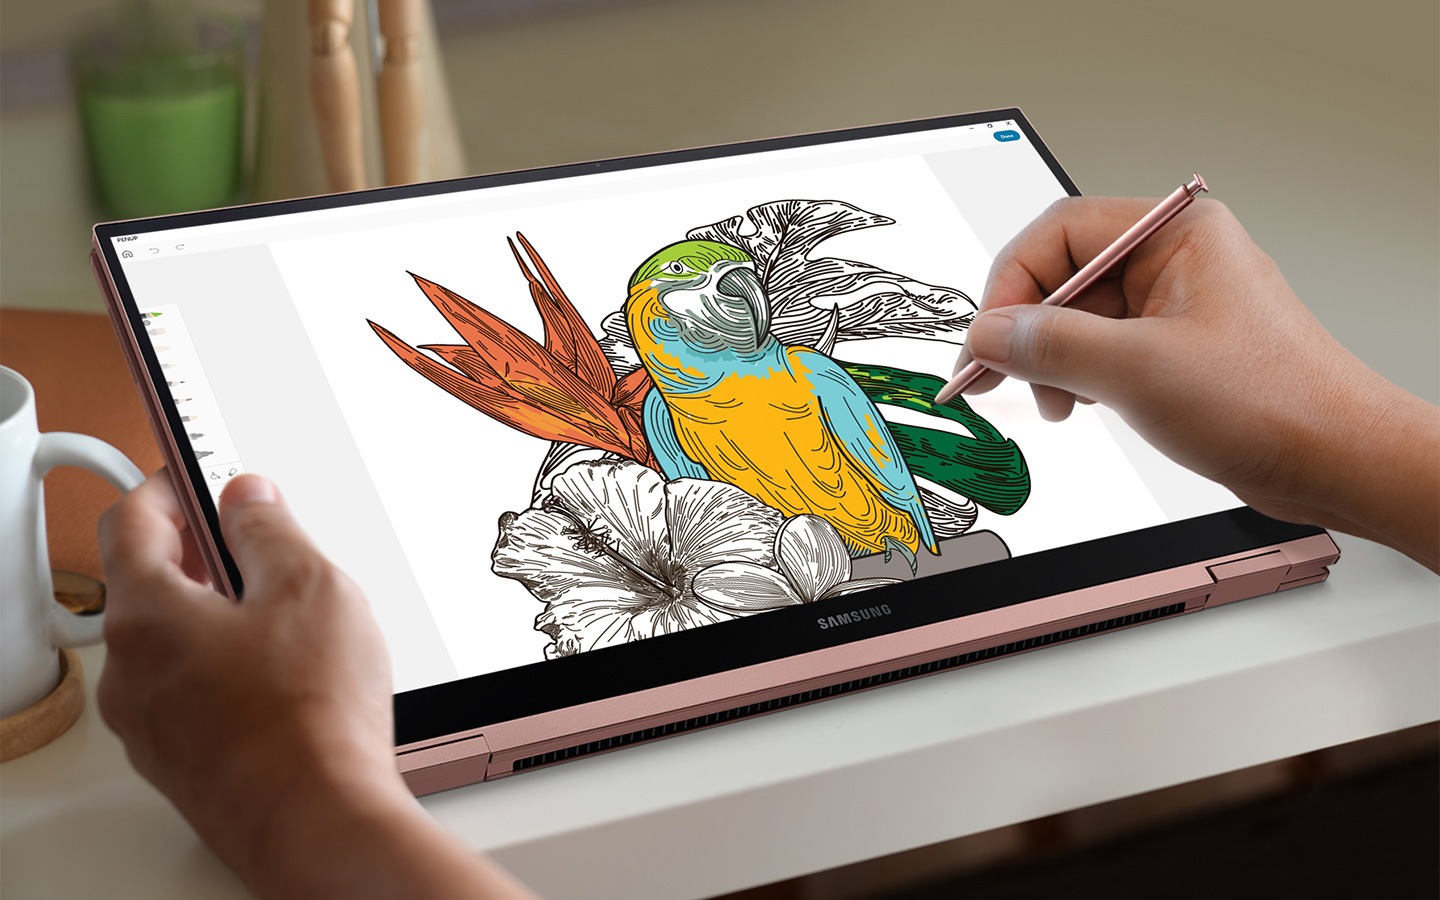 A woman uses S Pen to color in a drawing of tropical objects like flowers and a bird on PENUP app.